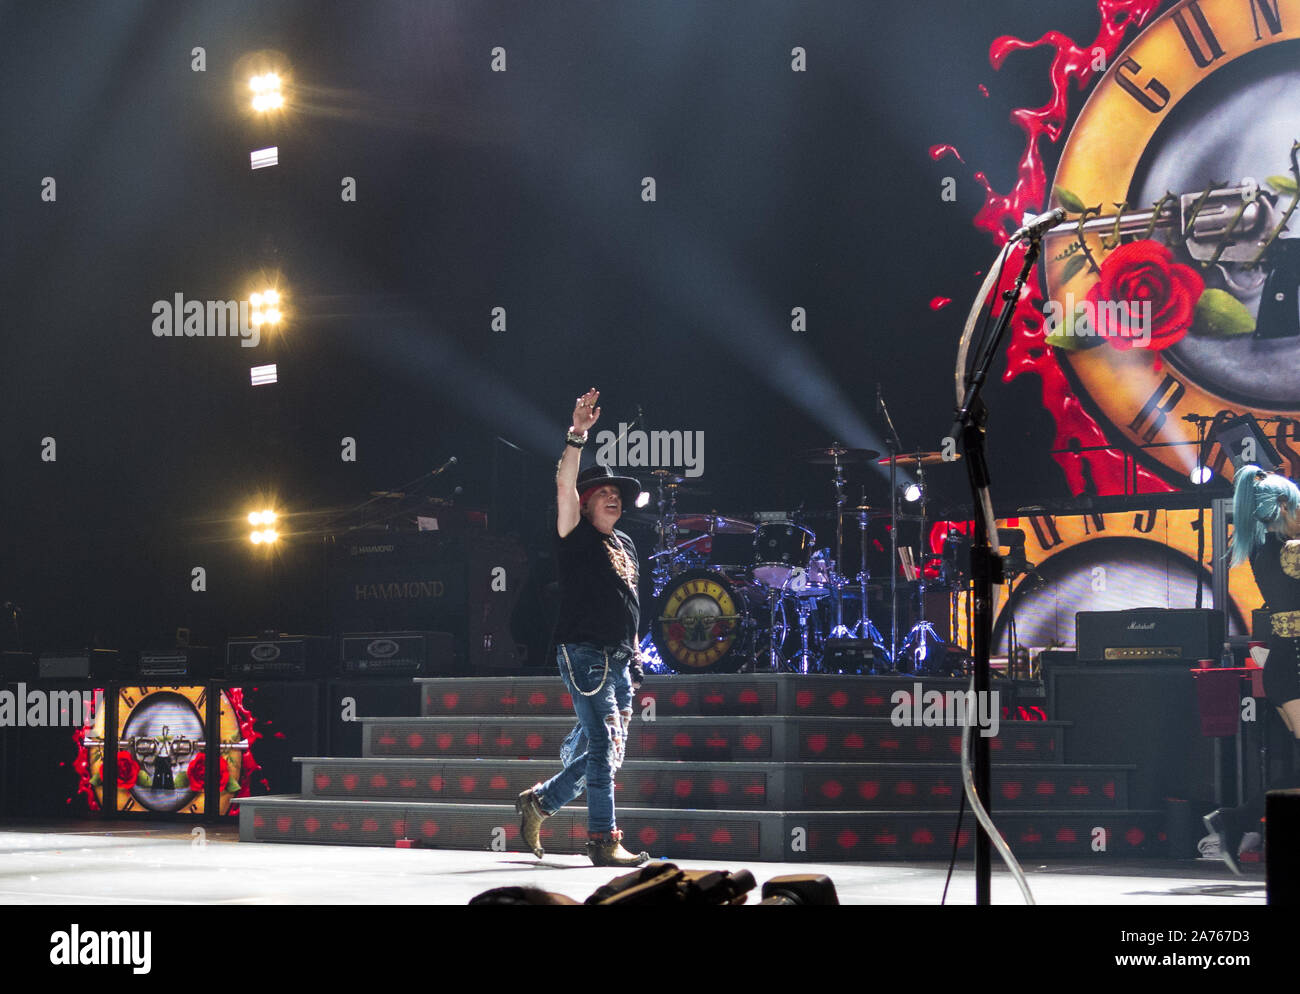 October 29, 2019, Salt Lake City, UT, USA: Axl Rose of the rock band Guns N' Roses waves to the crowd during a concert on their The Not in This Lifetime Tour at Vivint Smart Home Arena. (Credit Image: © KC Alfred/ZUMA Wire) Stock Photo